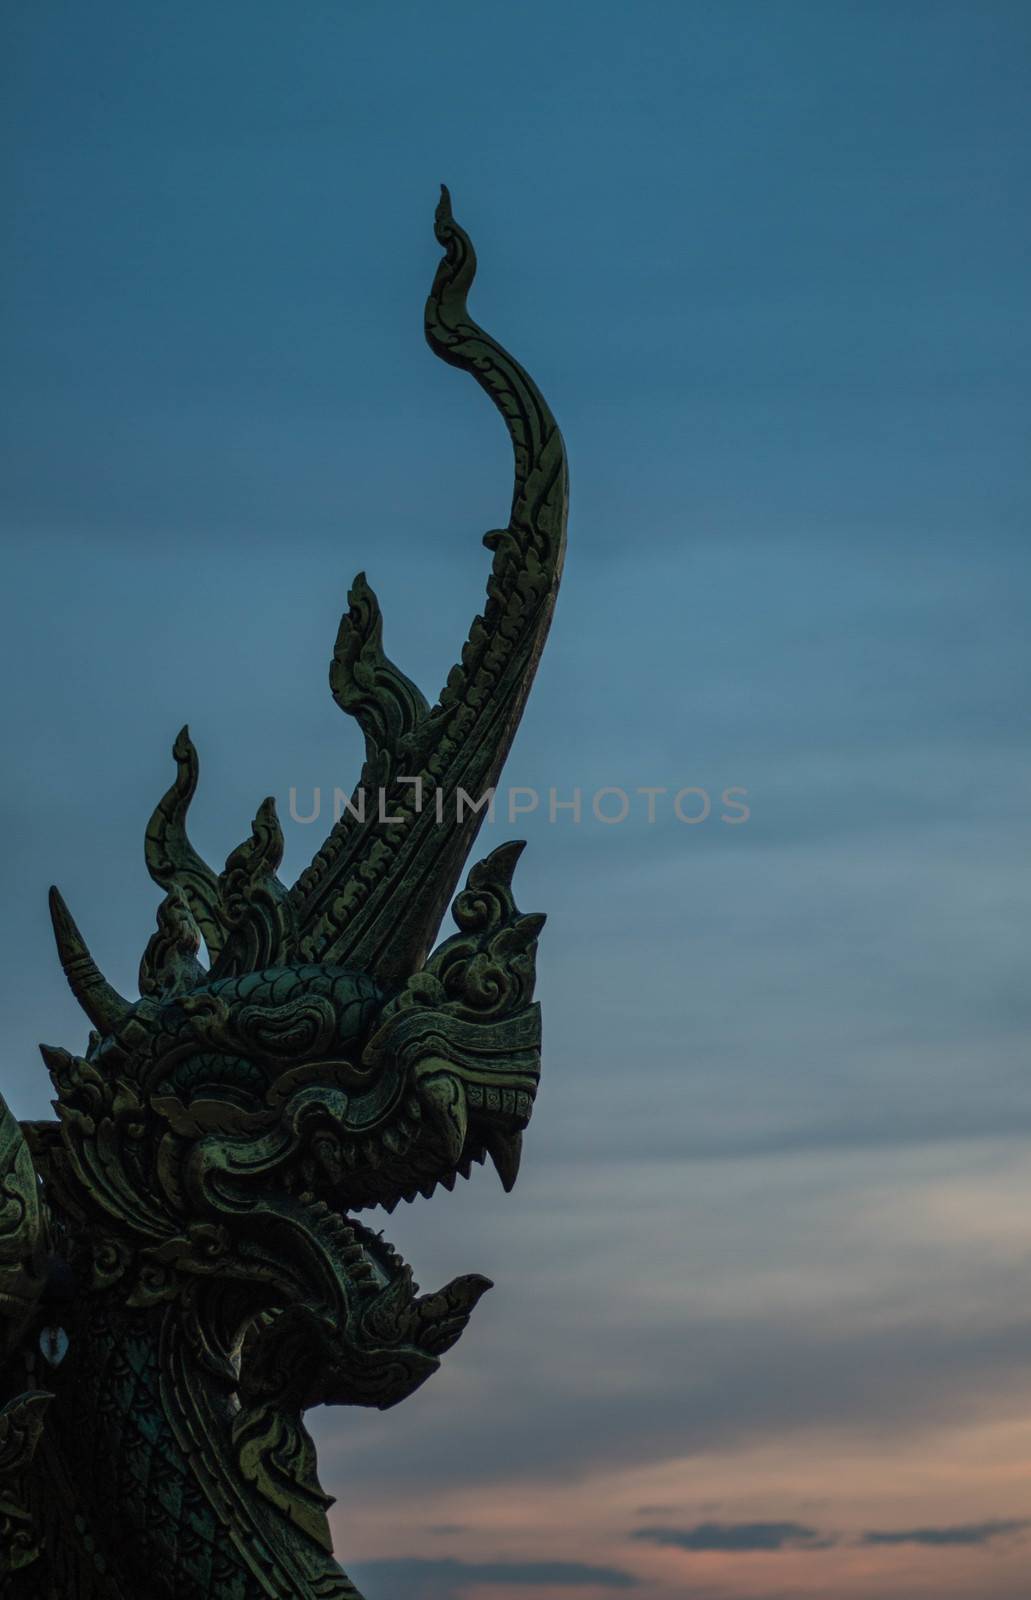 beautiful naga statue or King of nagas Serpent animal in Buddhist legend by N_u_T